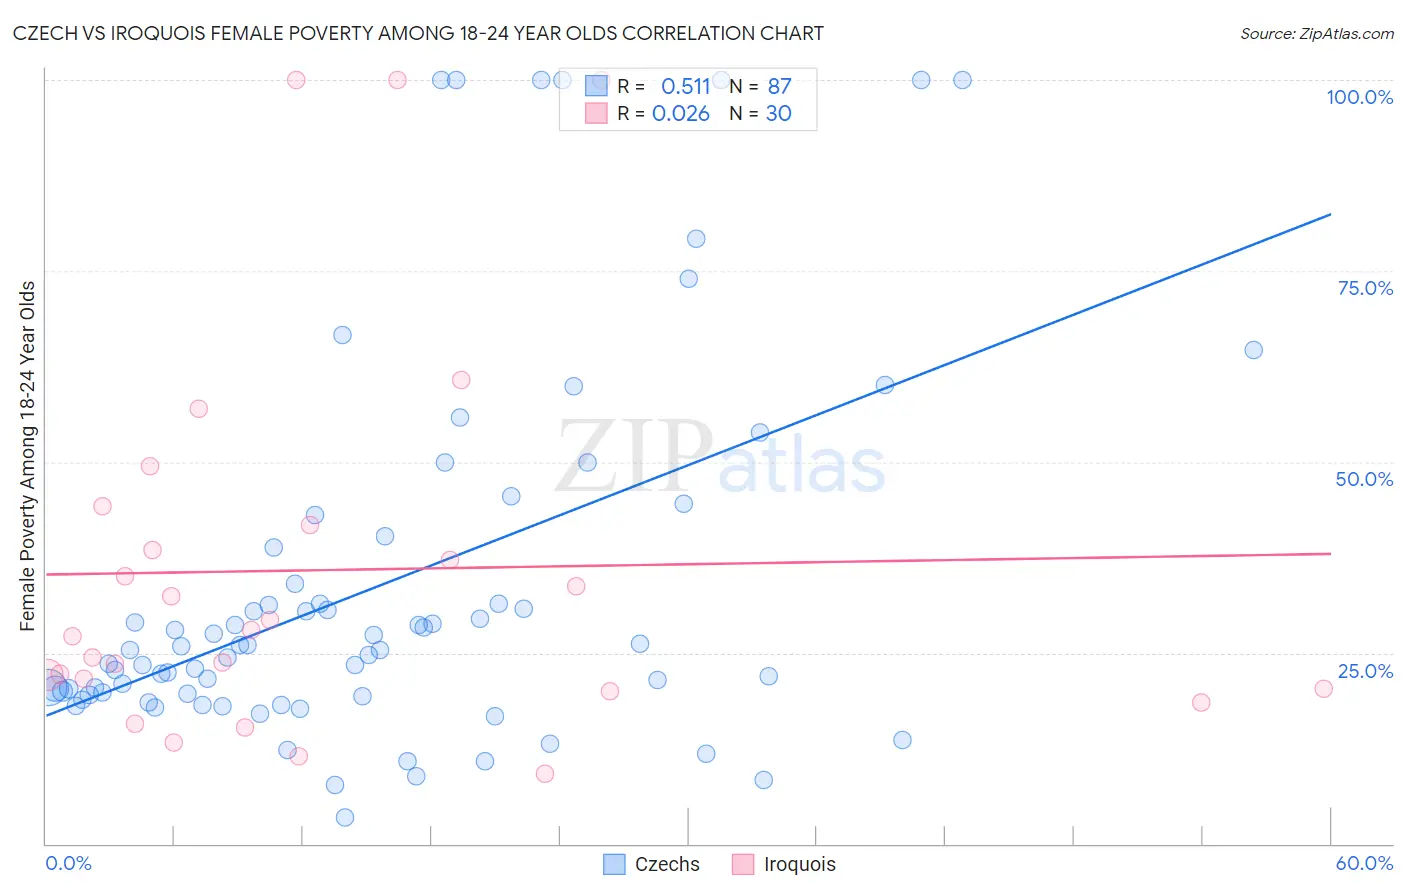 Czech vs Iroquois Female Poverty Among 18-24 Year Olds